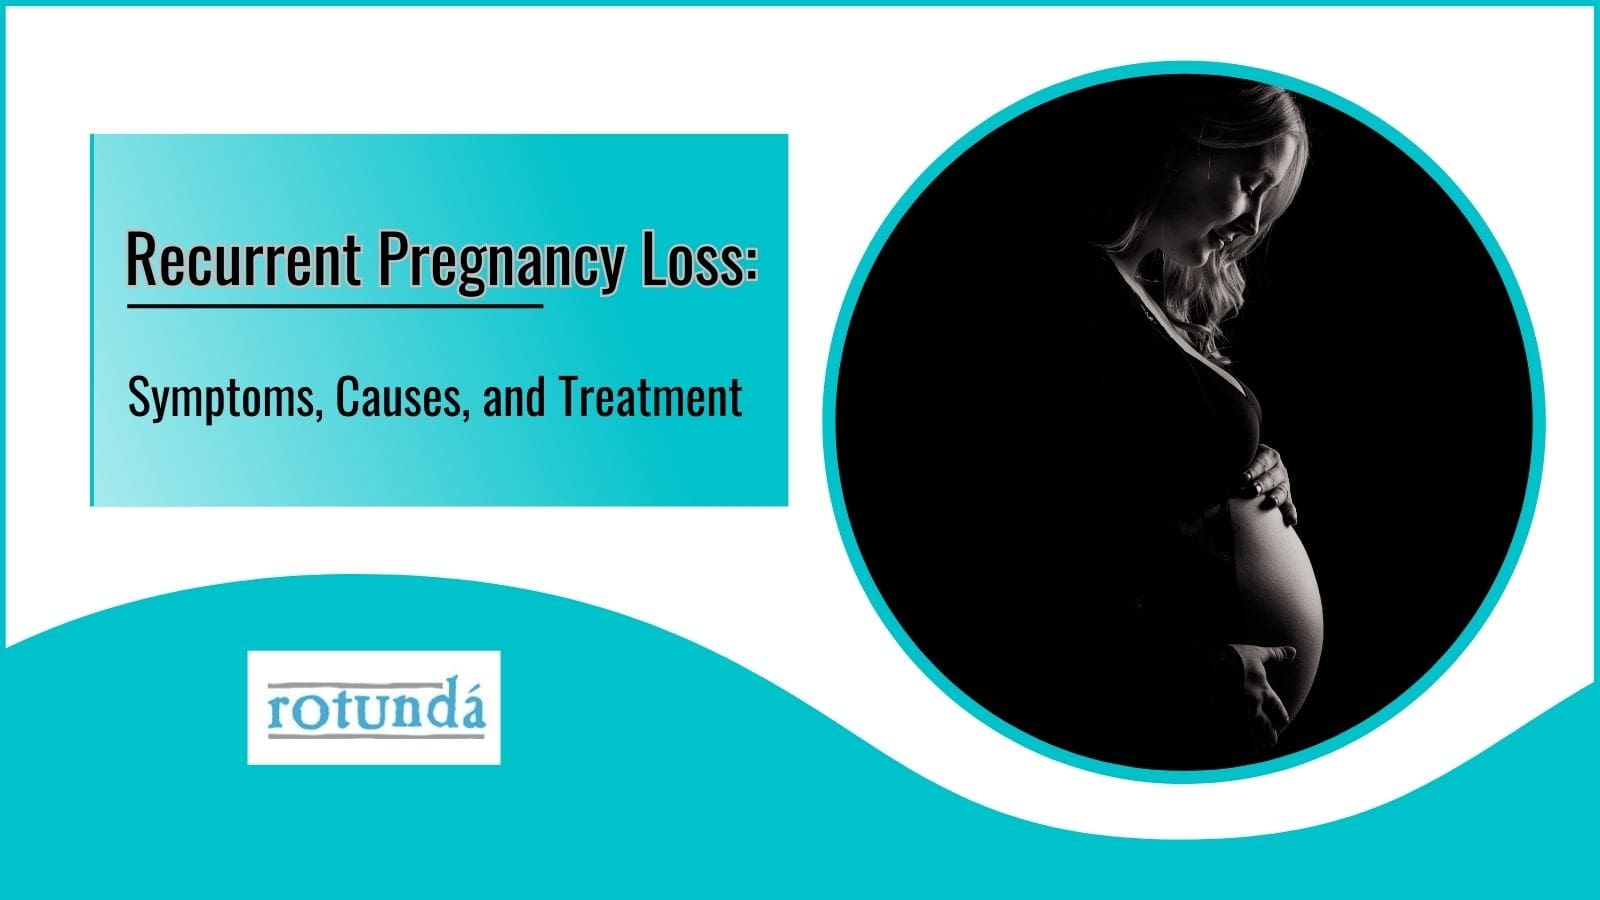 Recurrent Pregnancy Loss: Symptoms, Causes, and Treatment